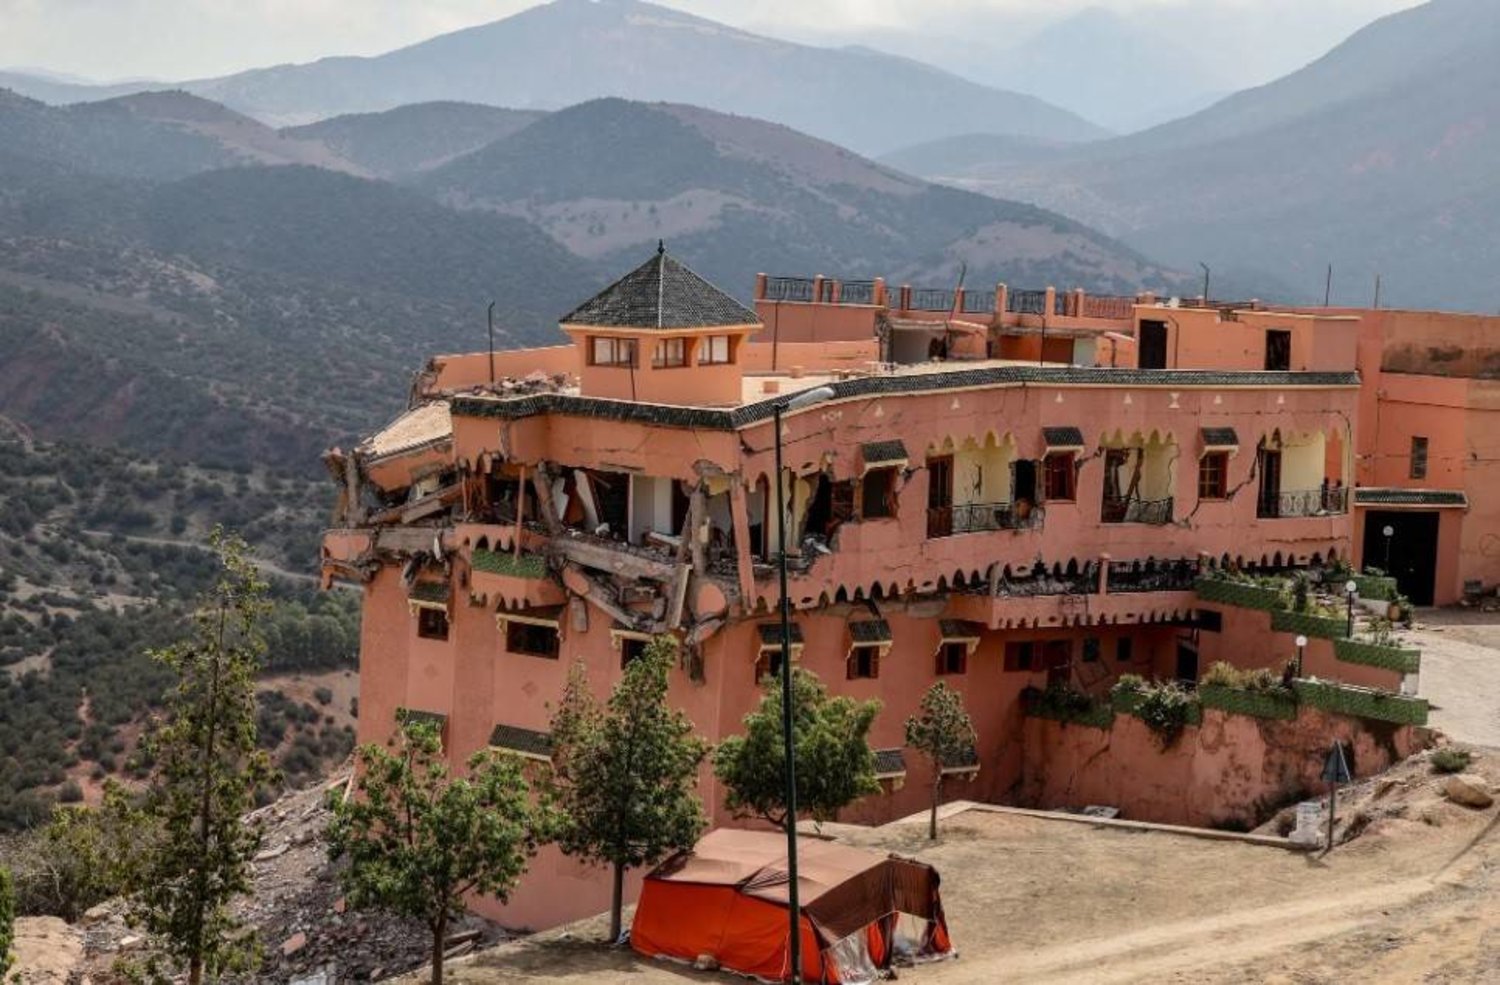 A damaged hotel in the town of Moulay Brahim, about 45 miles south of Marrakesh. Credit...Tiago Petinga/EPA, via Shutterstock